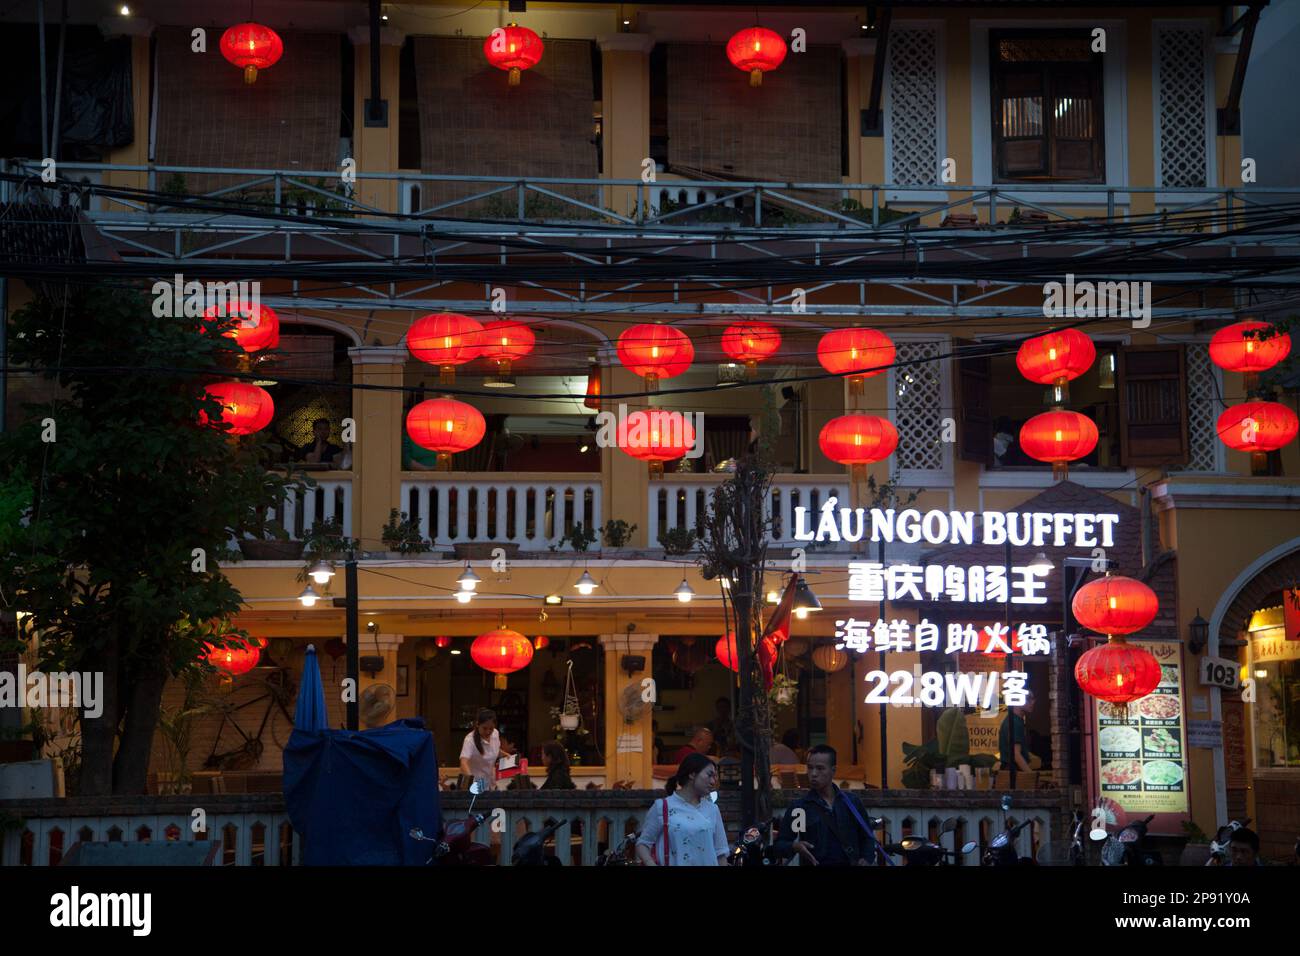 Nha Trang, Vietnam - March 31, 2018: Asian restaurant exterior decorated with red paper lanterns. People eating at a Chinese buffet, view of windows f Stock Photo